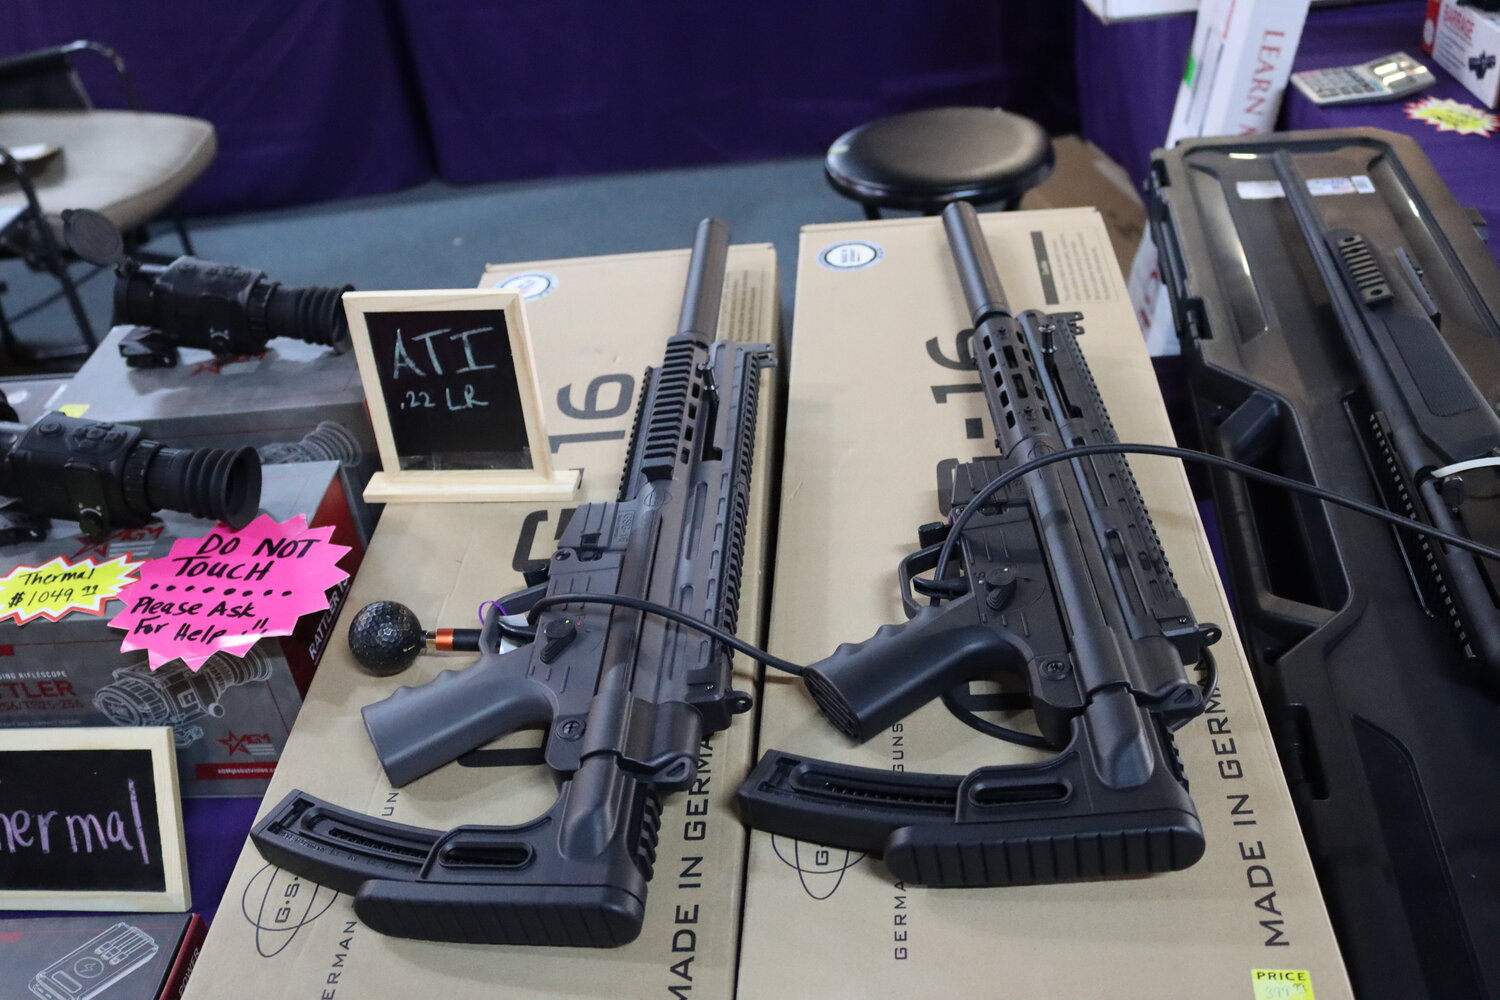 From the space-age Kel-Tec to the Tokarev of the old USSR, Falcon Firearms of Burleson offered event-goers an eclectic selection of armaments.